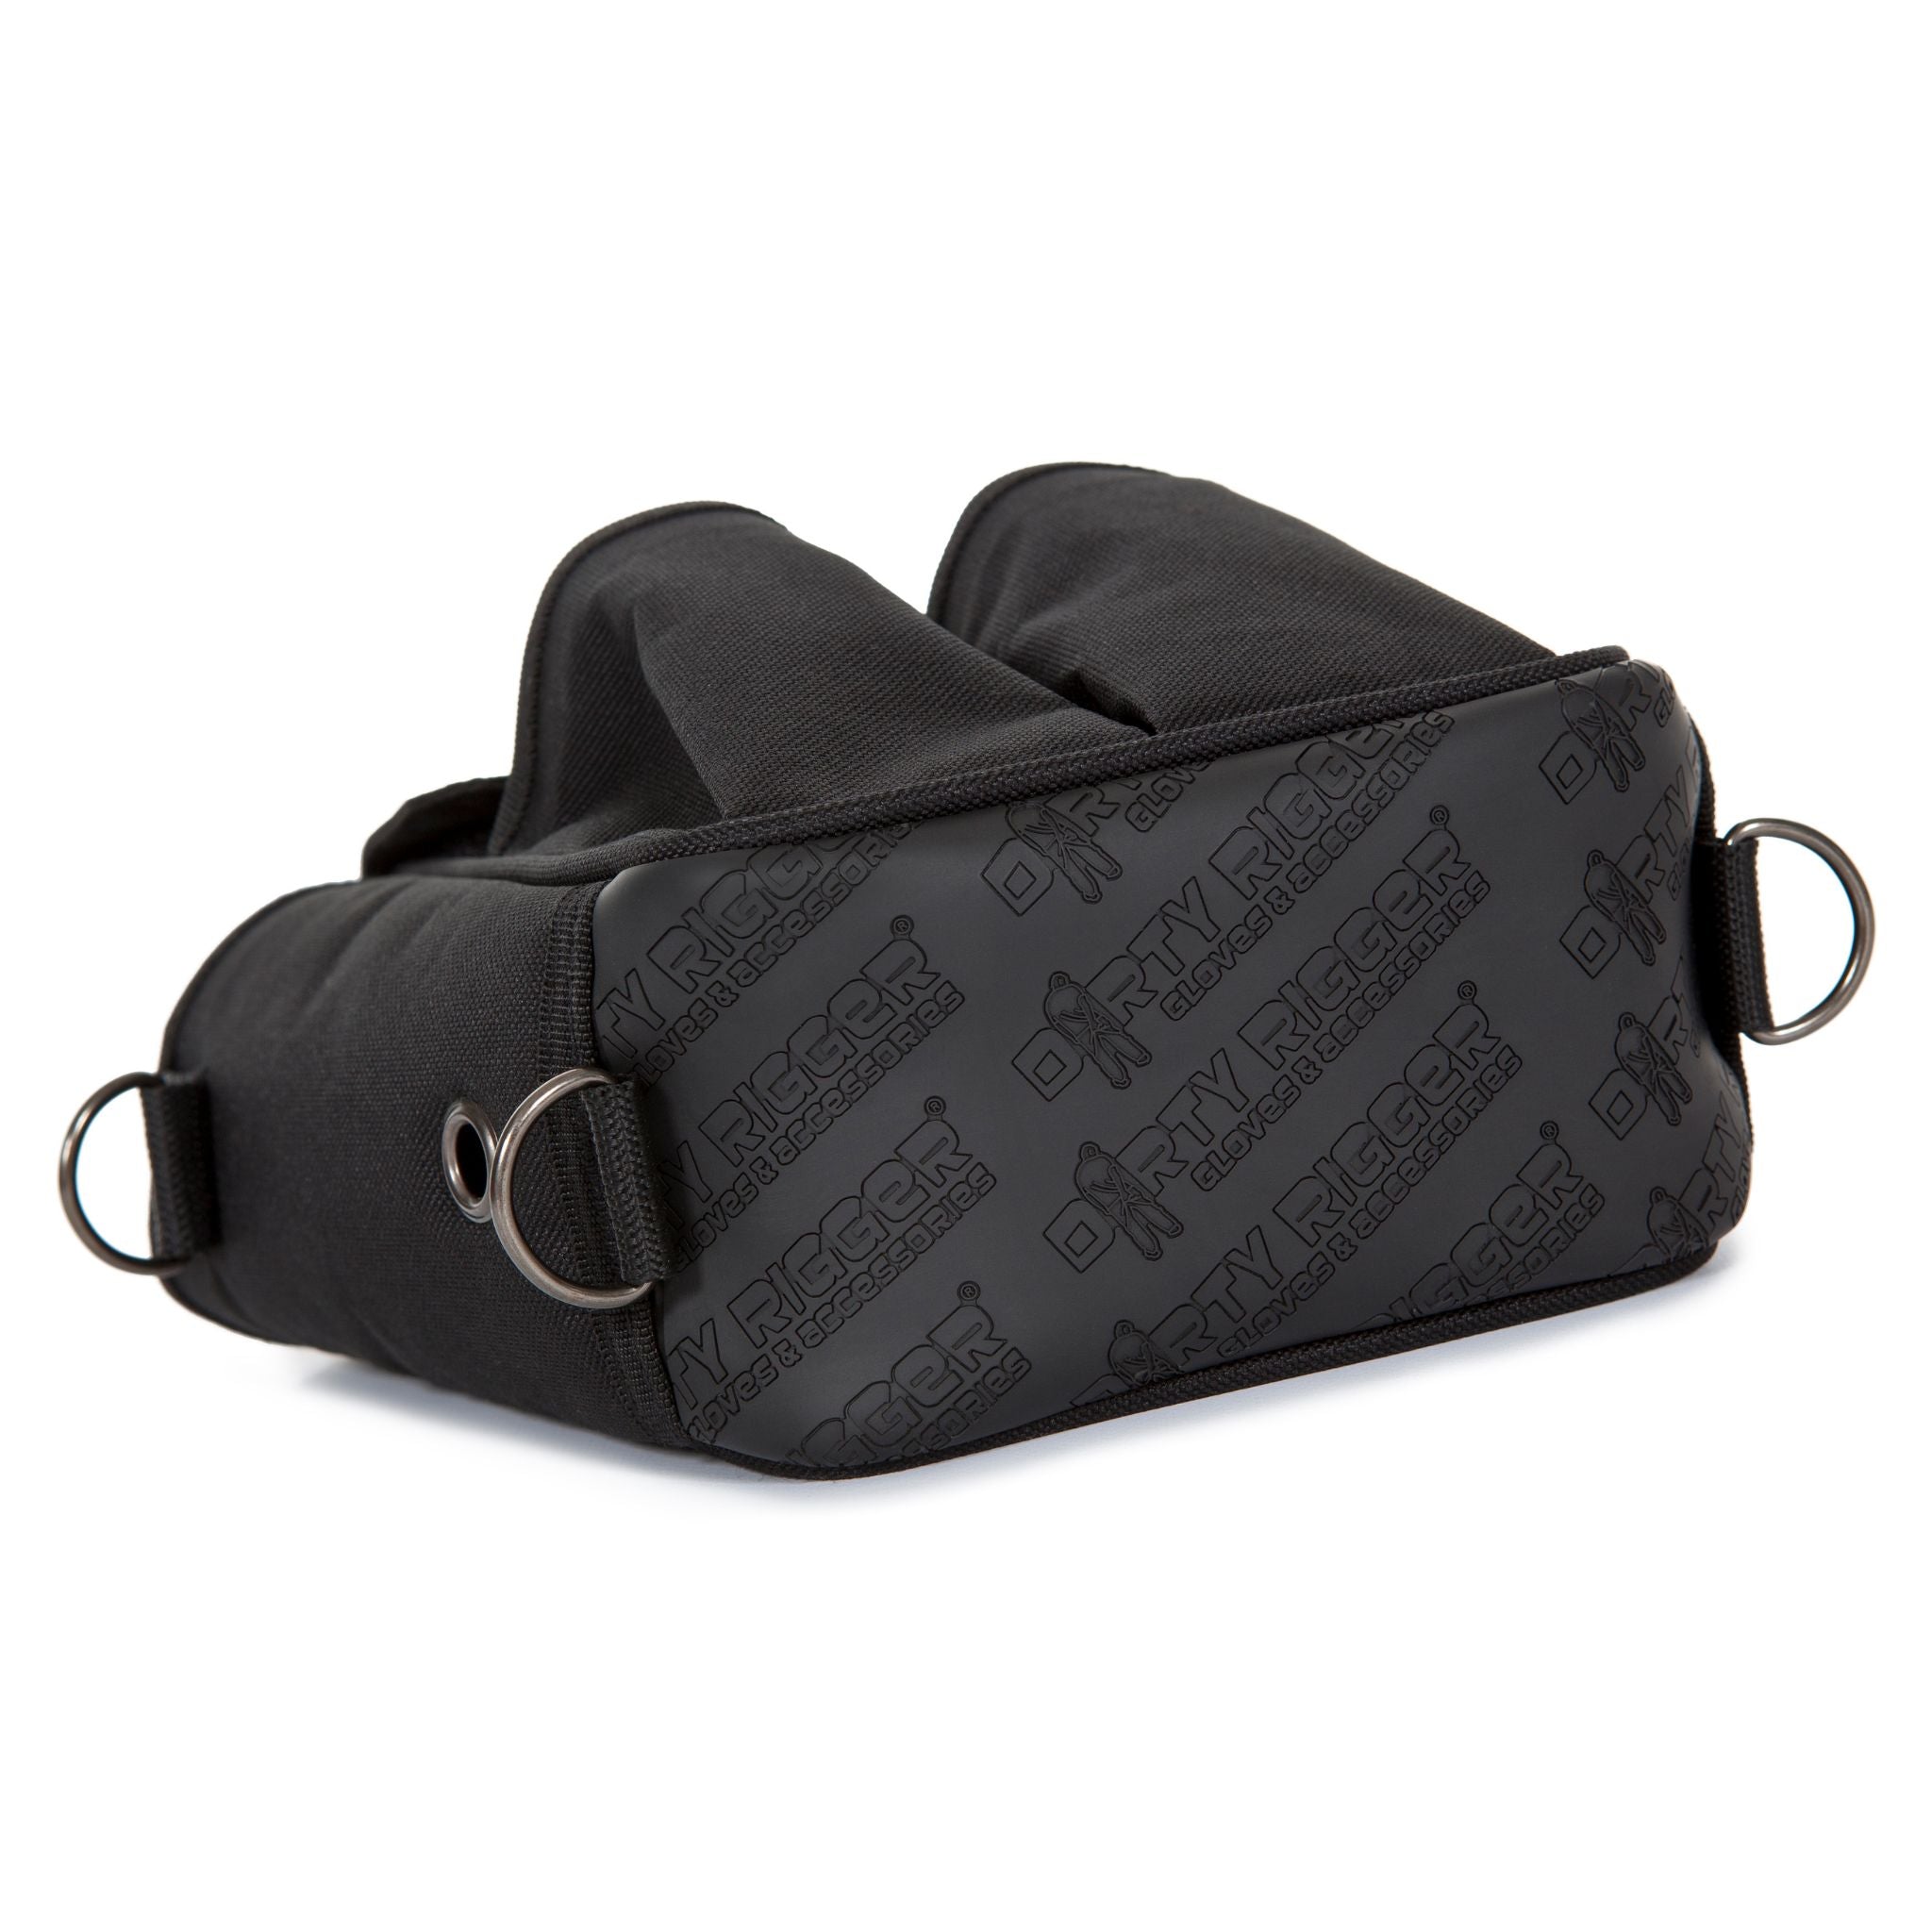 Tech pouch with tool pockets, rip-proof base and d-rings